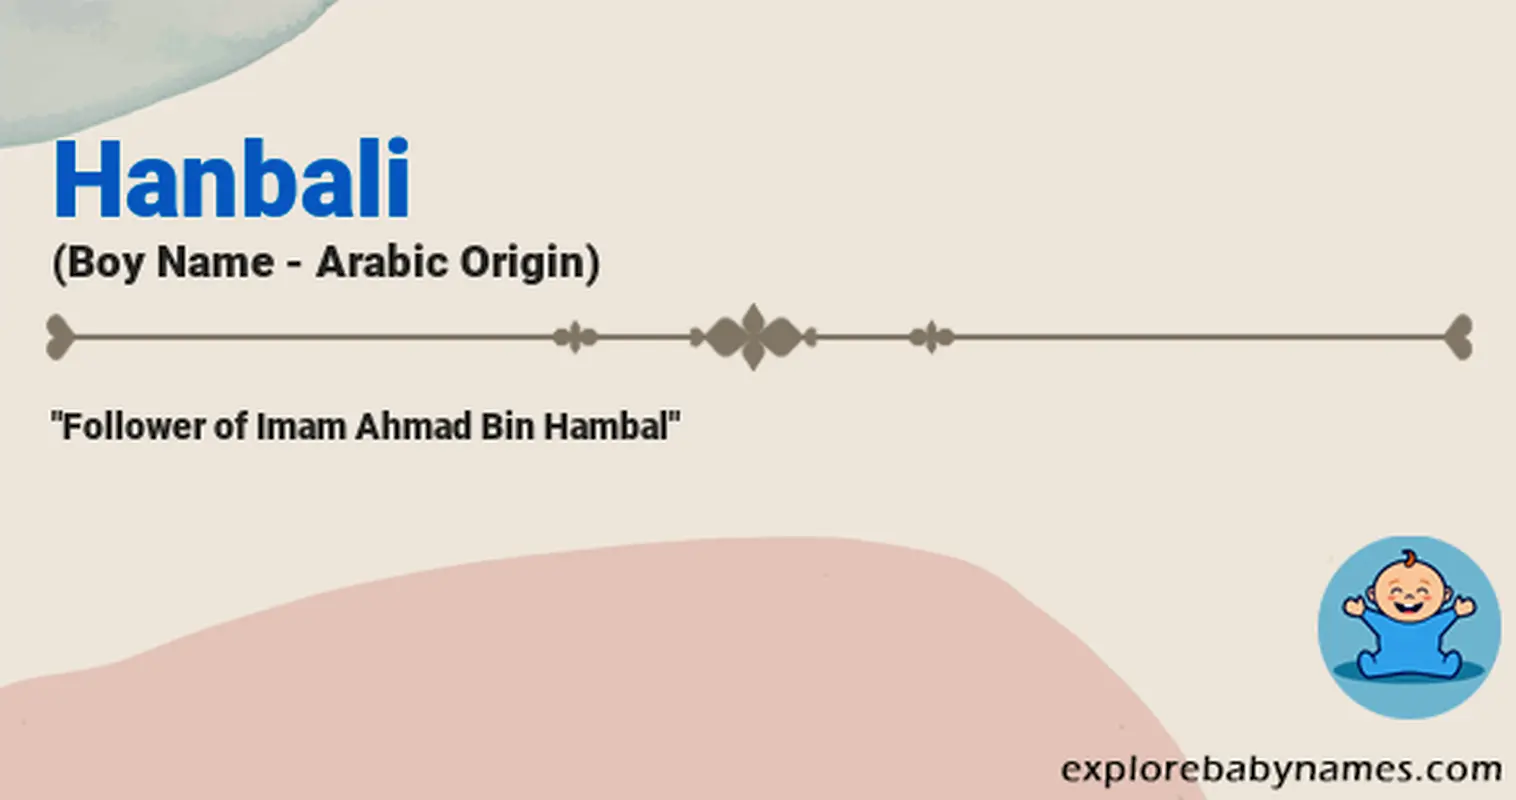 Meaning of Hanbali